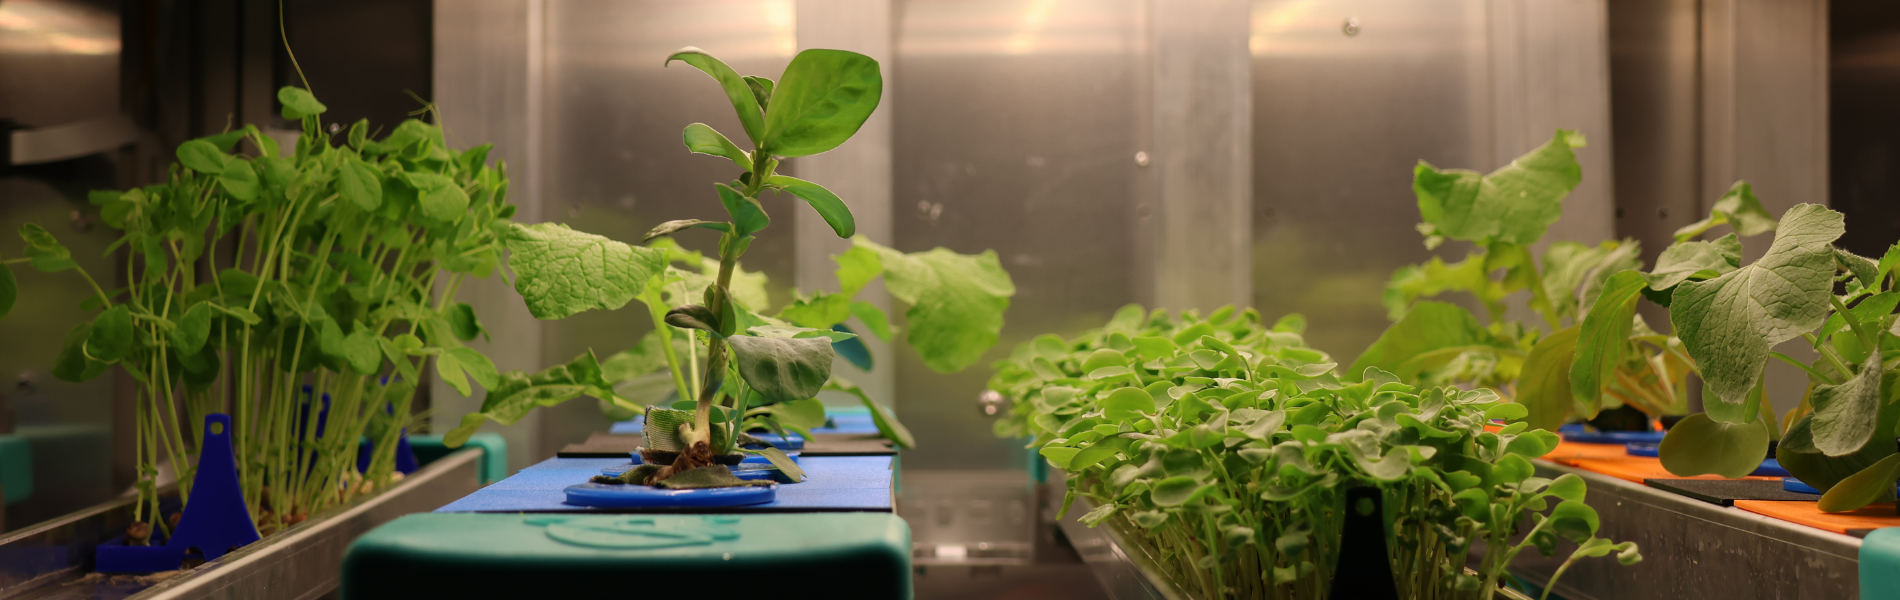 Edible greens grow inside of the GOOSE hydroponic system.